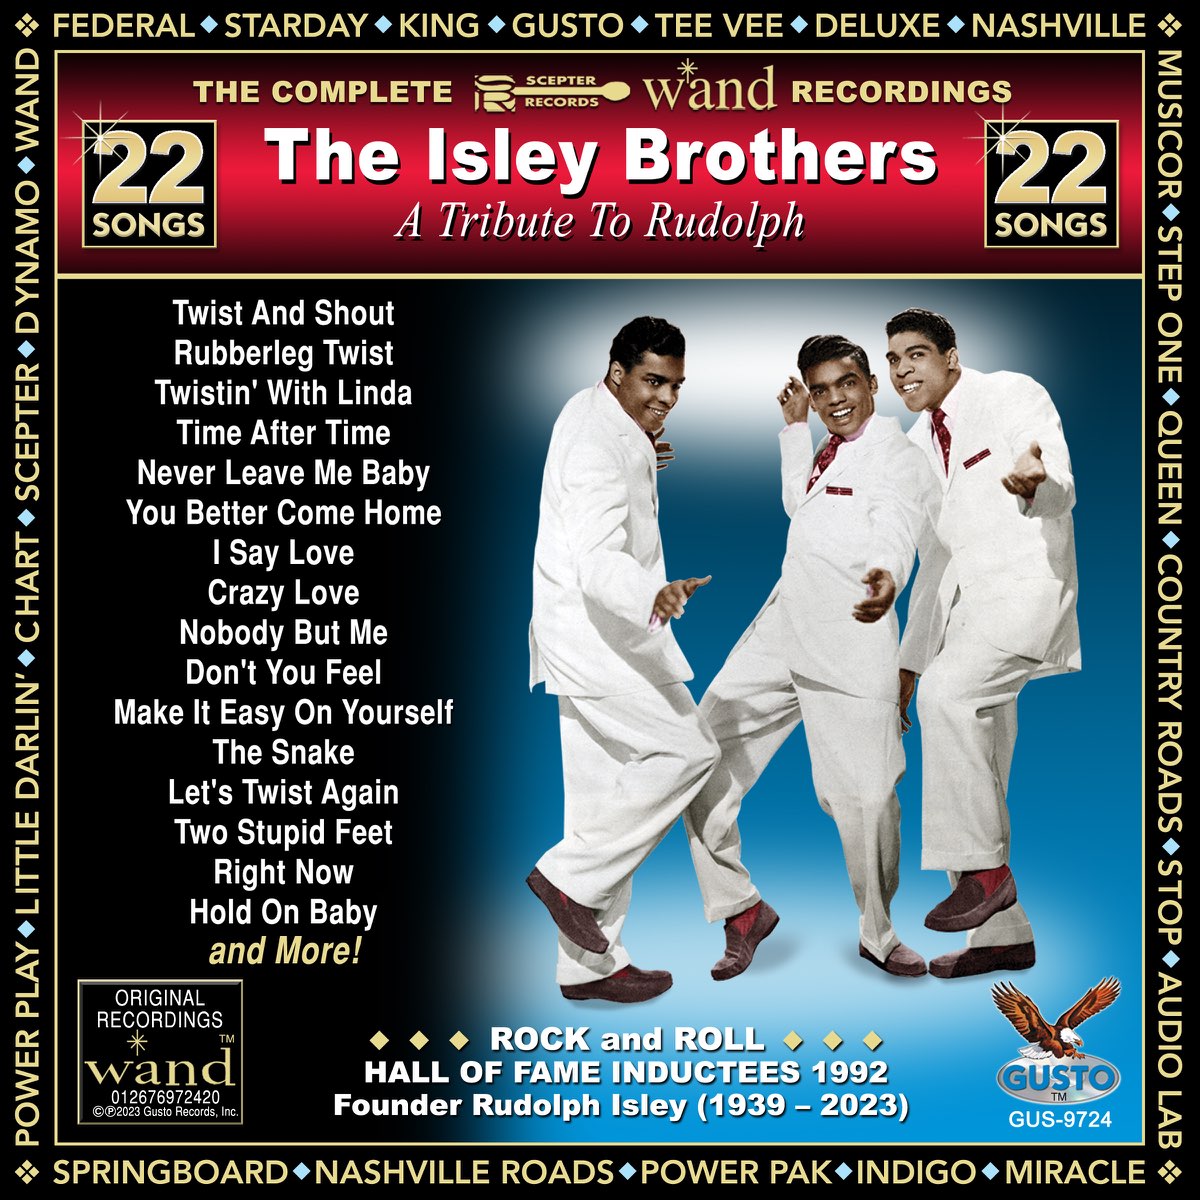 ‎the Isley Brothers A Tribute To Rudolph Original Wand Records Recordings Album By The